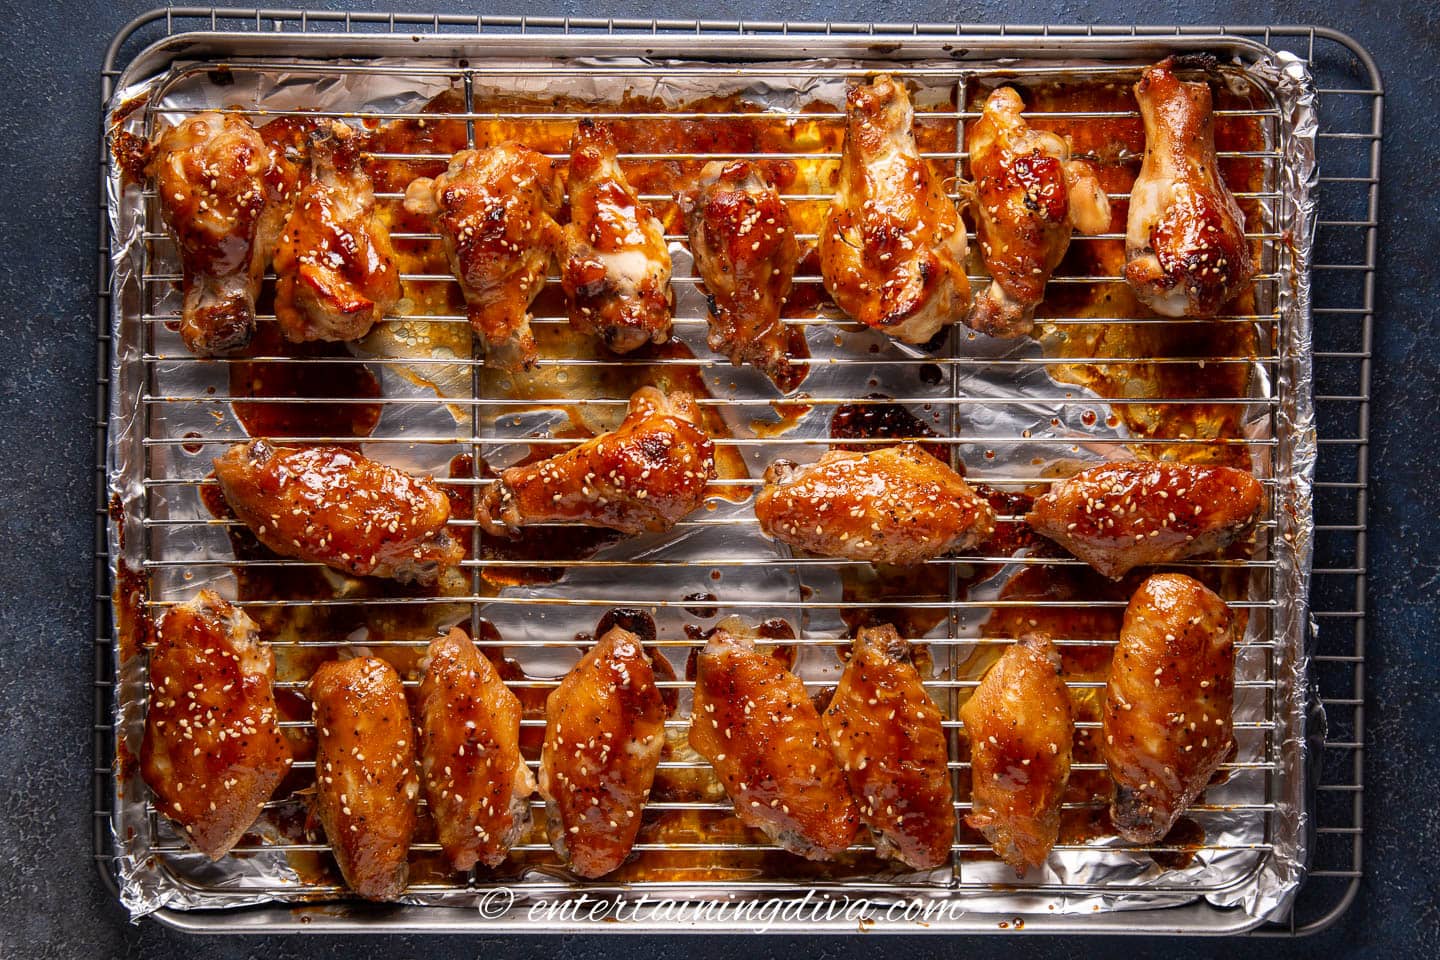 Baked chicken wings with oyster sauce on a baking rack